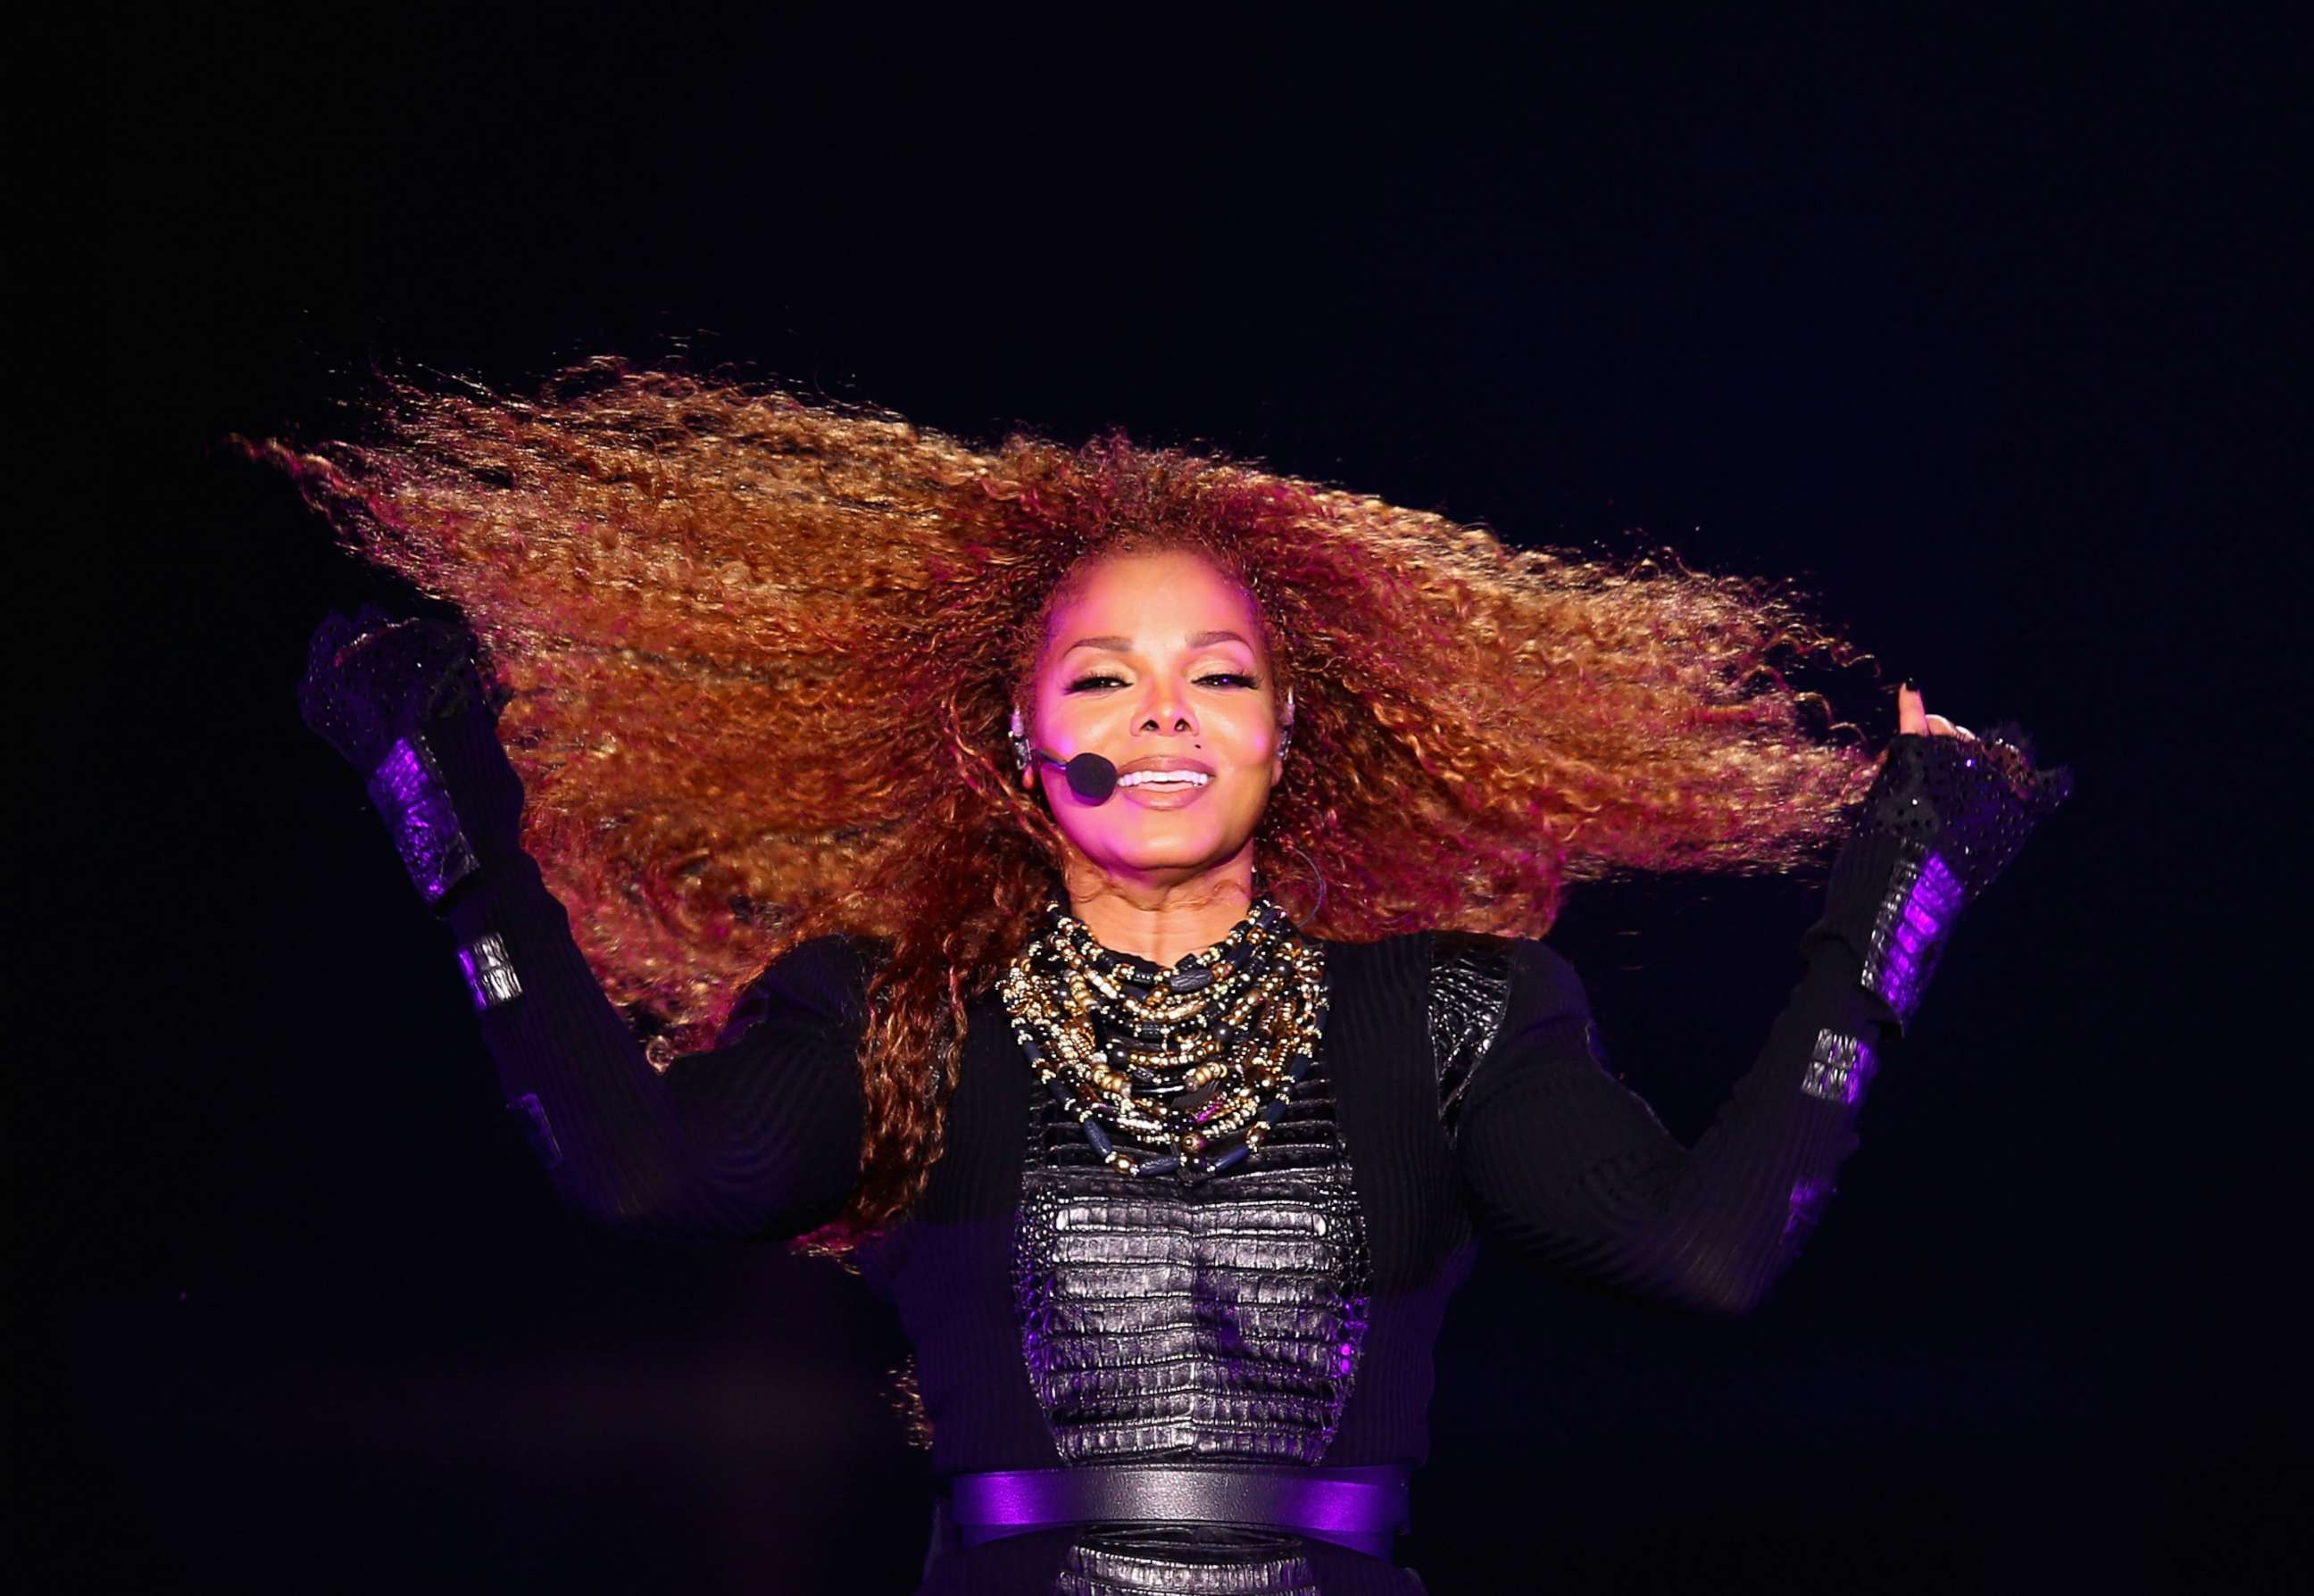 PHOTO: Janet Jackson performs after the Dubai World Cup at the Meydan Racecourse on March 26, 2016 in Dubai, United Arab Emirates.